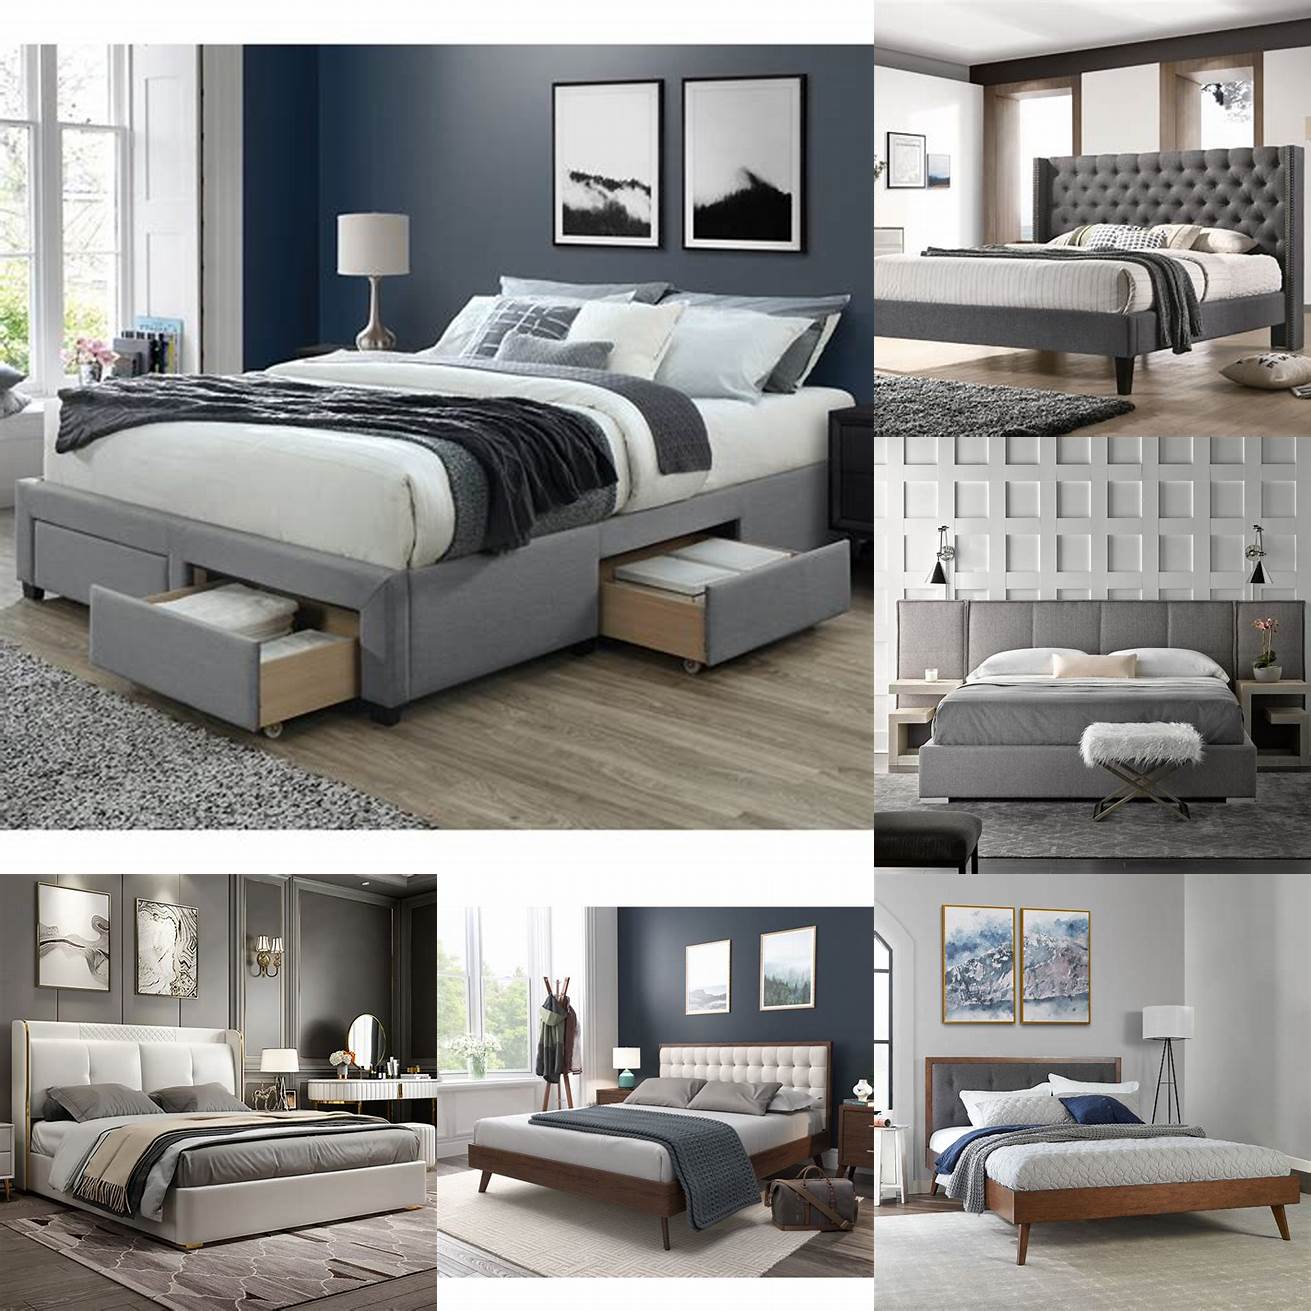 The Upholstered Platform Bed Queen in a contemporary bedroom